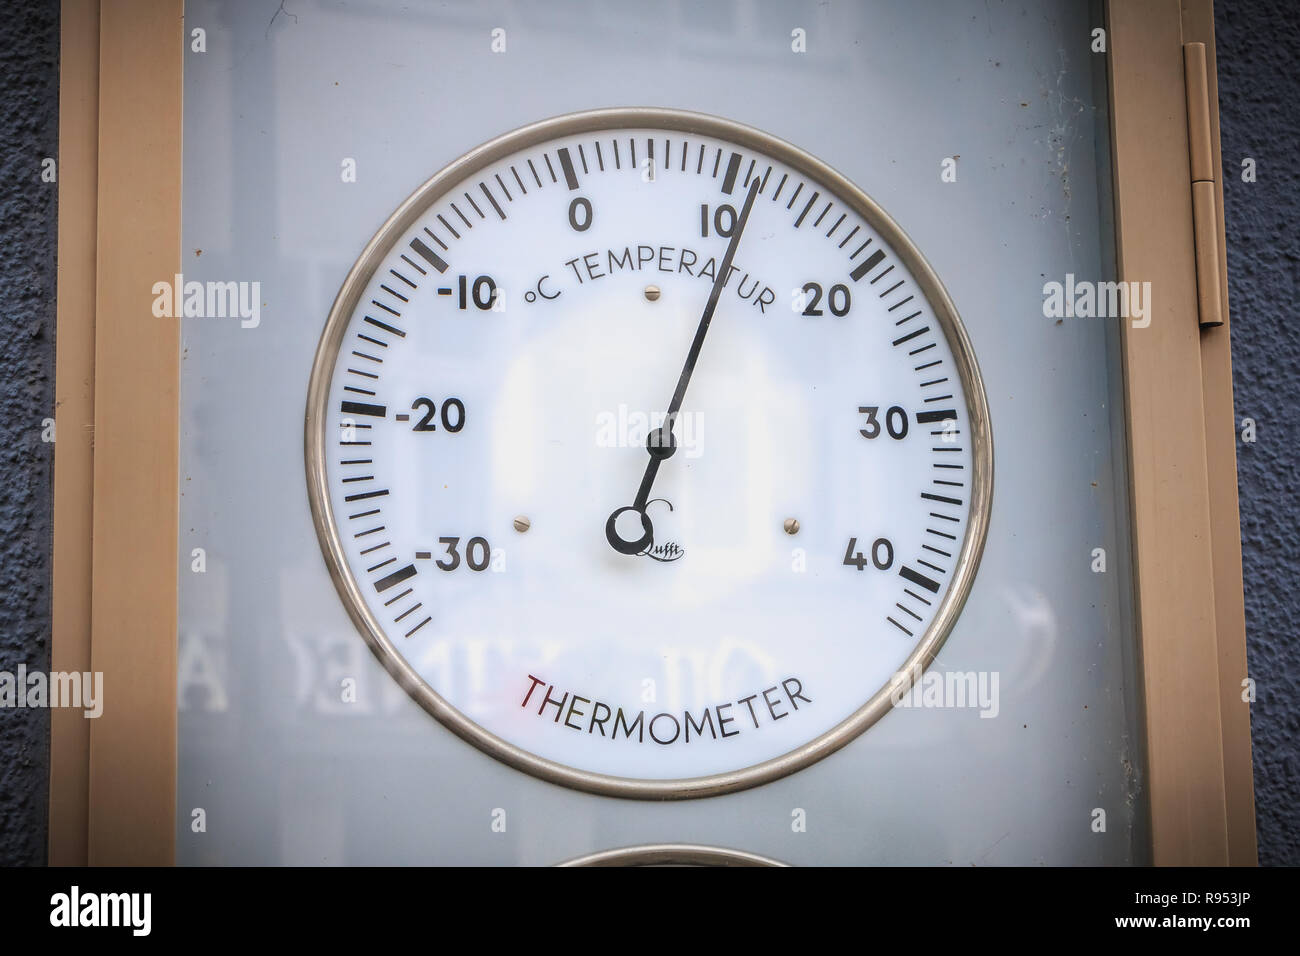 https://c8.alamy.com/comp/R953JP/freiburg-im-breisgau-germany-december-31-2017-thermometer-that-shows-the-outside-temperature-in-the-shop-window-in-the-city-center-store-on-a-win-R953JP.jpg